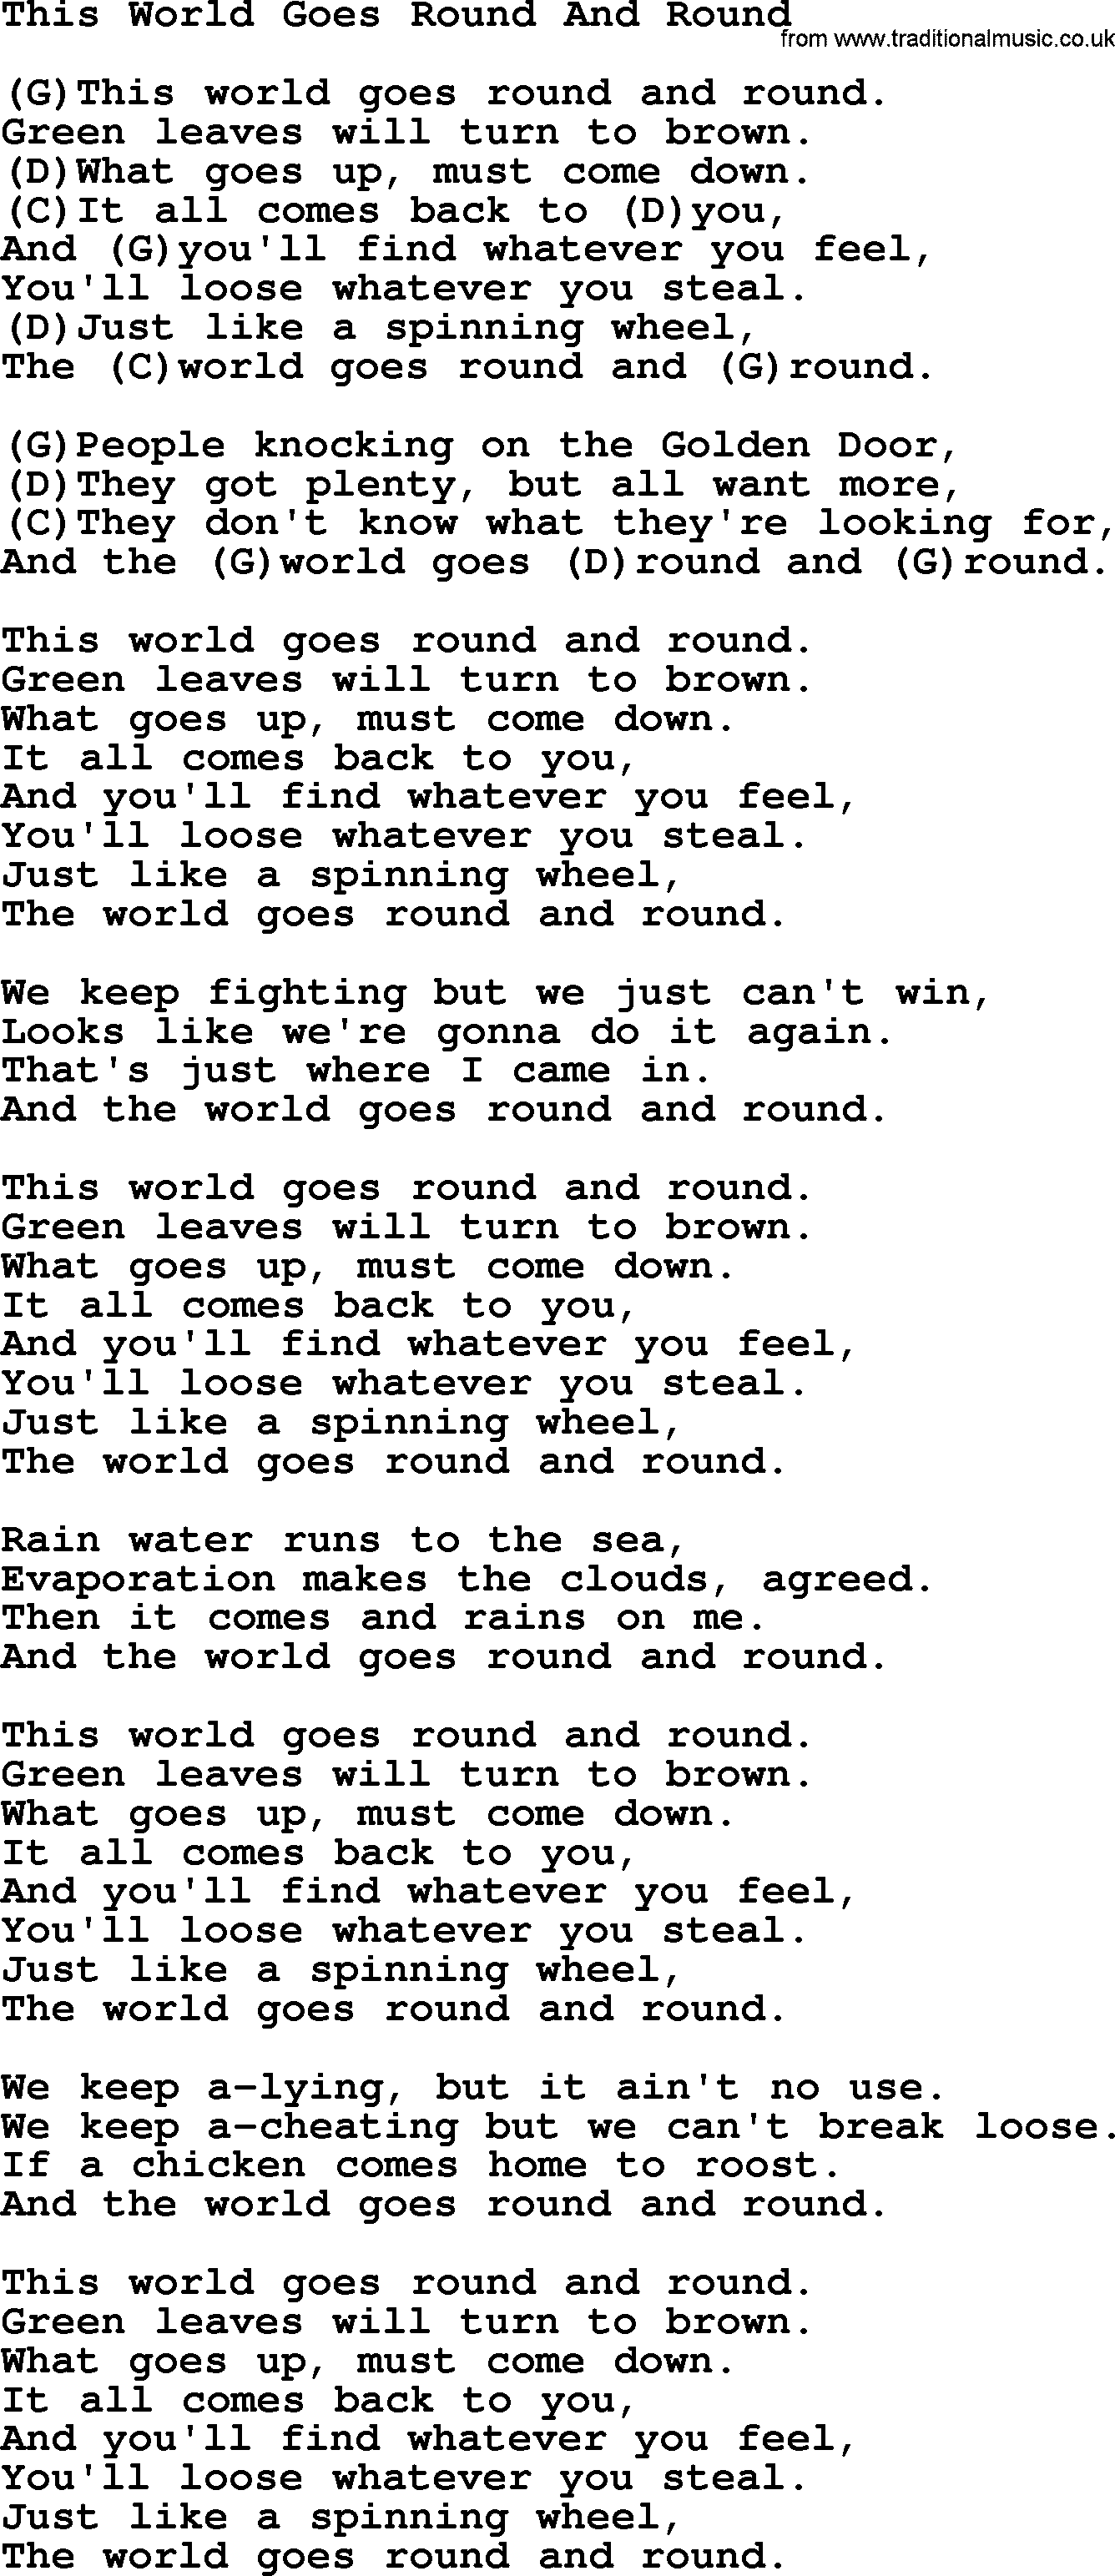 Tom Paxton song: This World Goes Round And Round, lyrics and chords